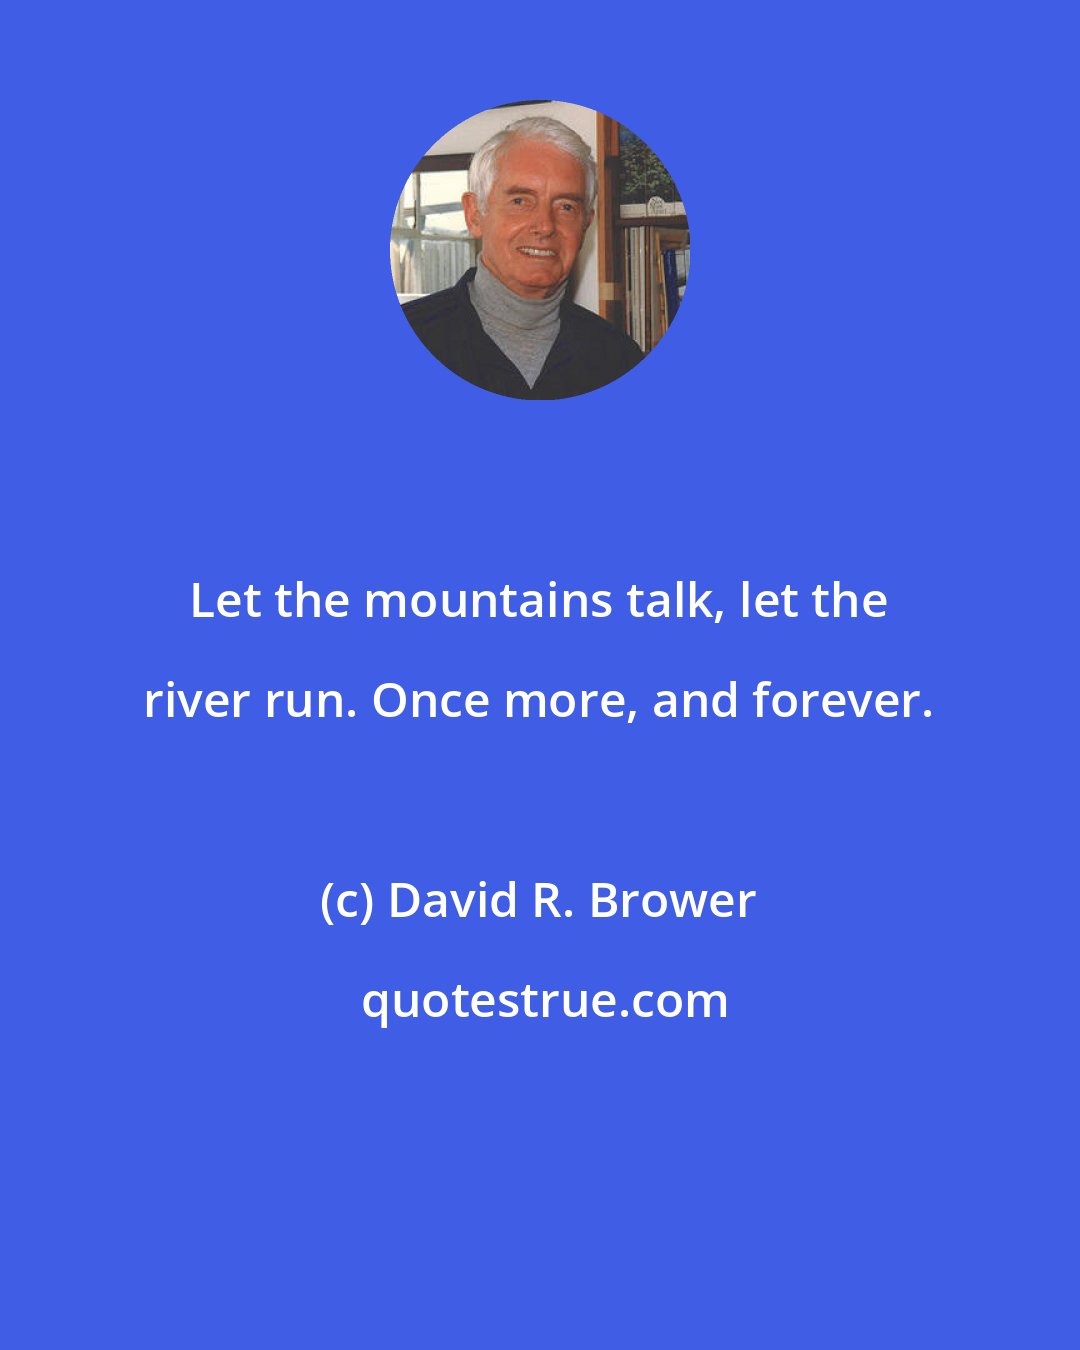 David R. Brower: Let the mountains talk, let the river run. Once more, and forever.